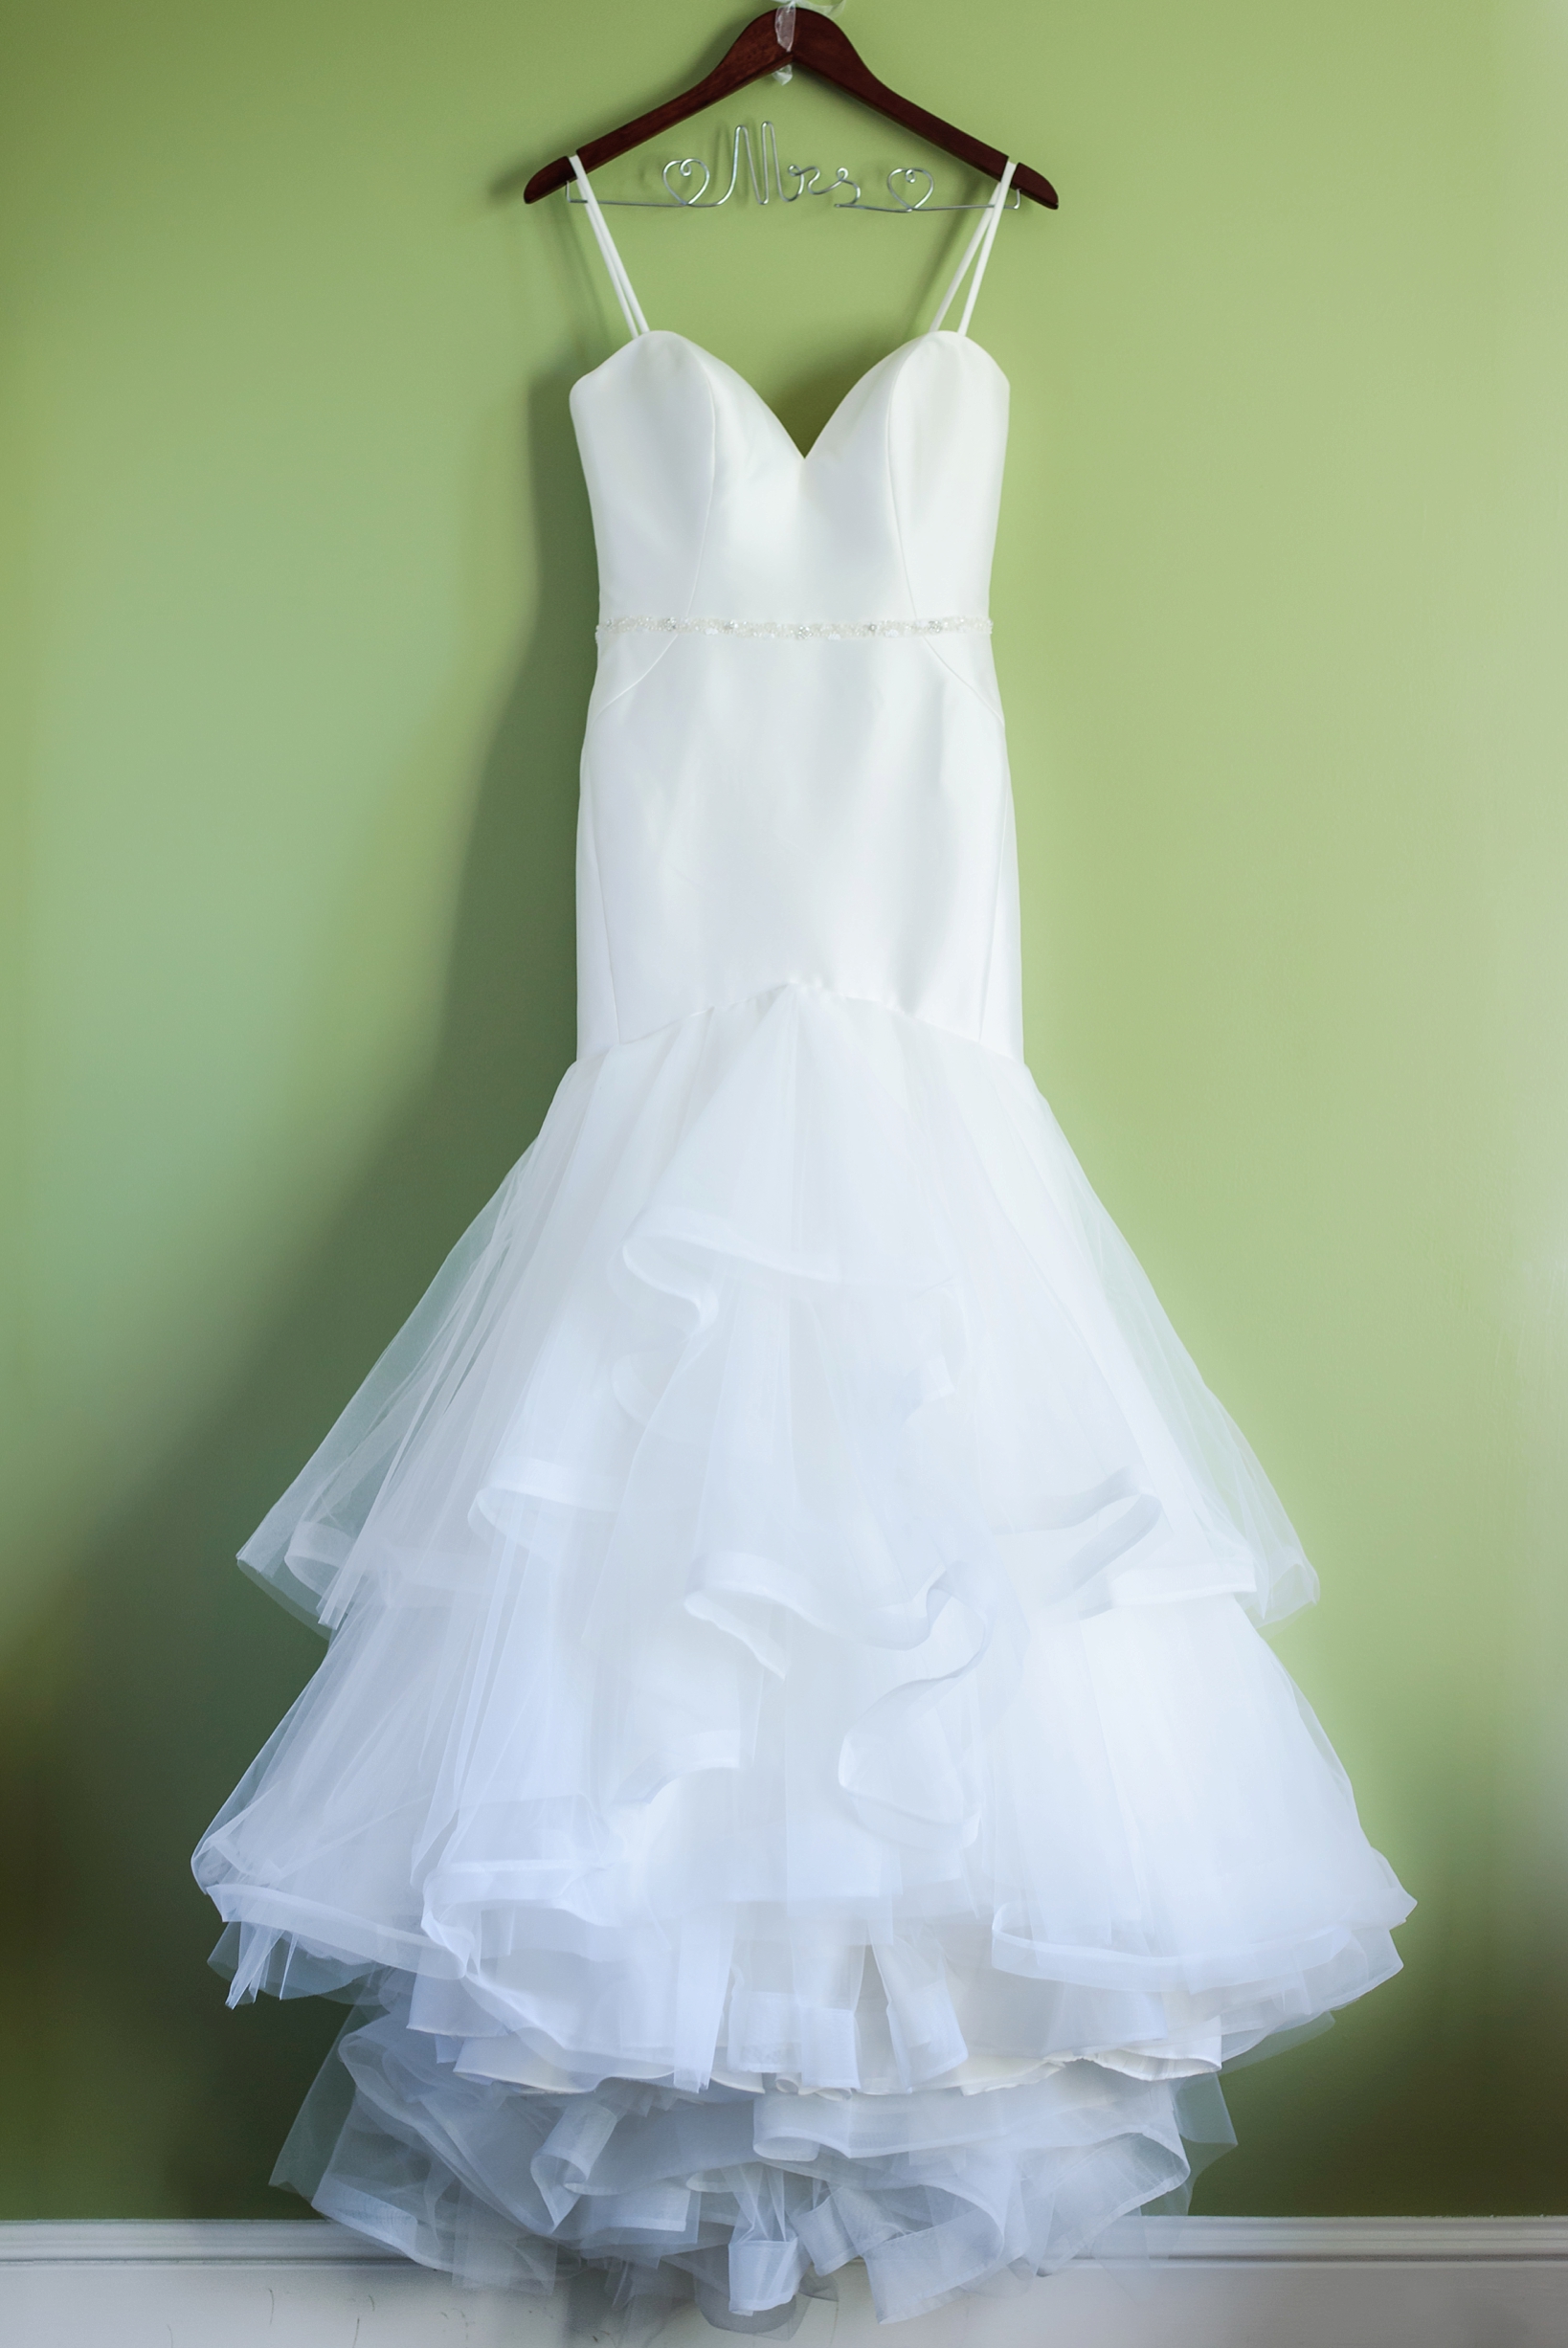 Bridal gown with tule details against a green wall photographed by Sarah & Ben Photography